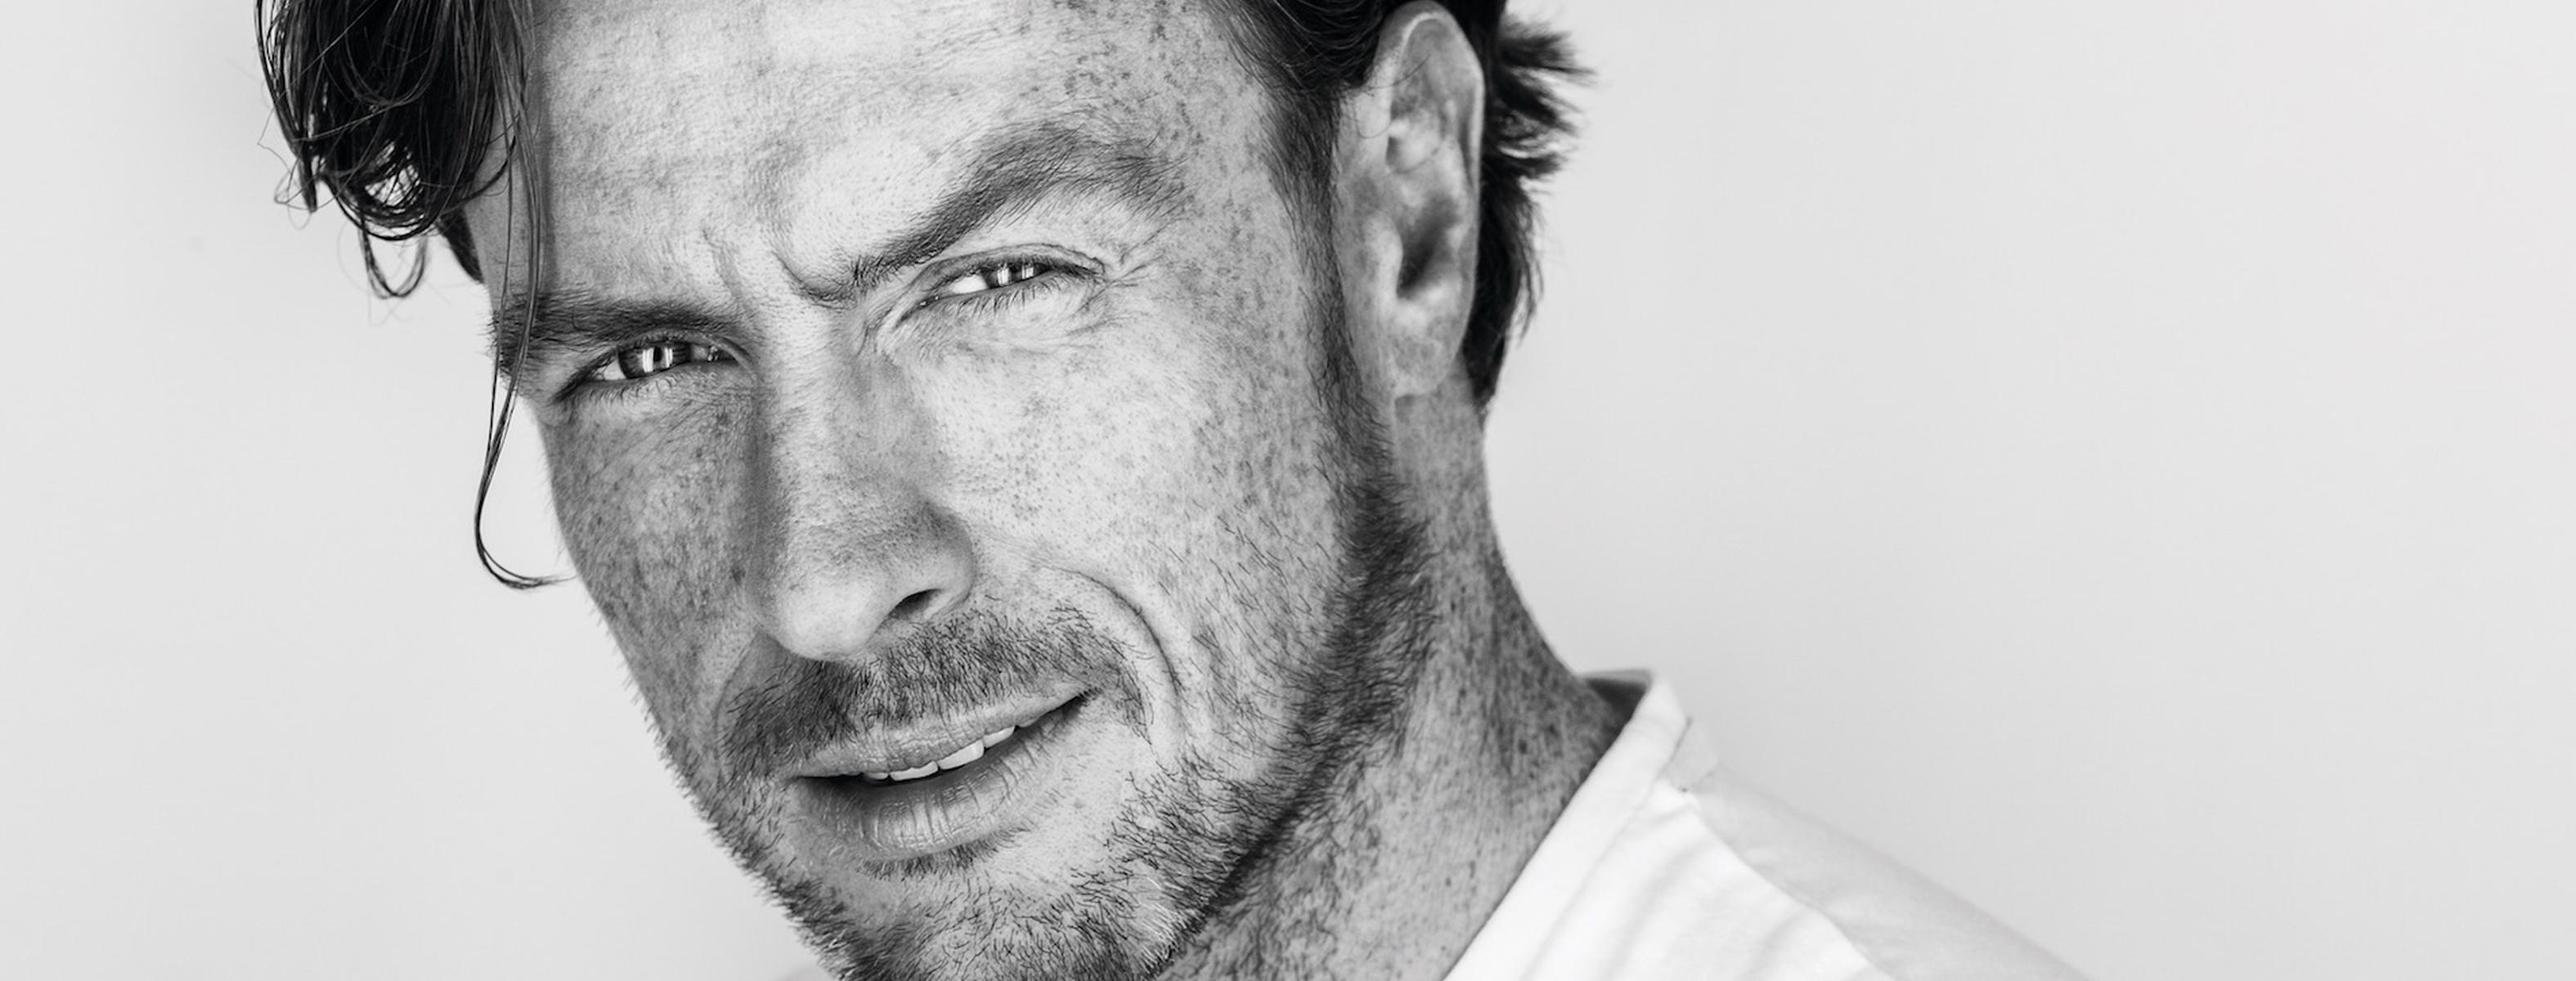 Toby Stephens: 'Black Sails' Star Had Some 'Unfinished Business